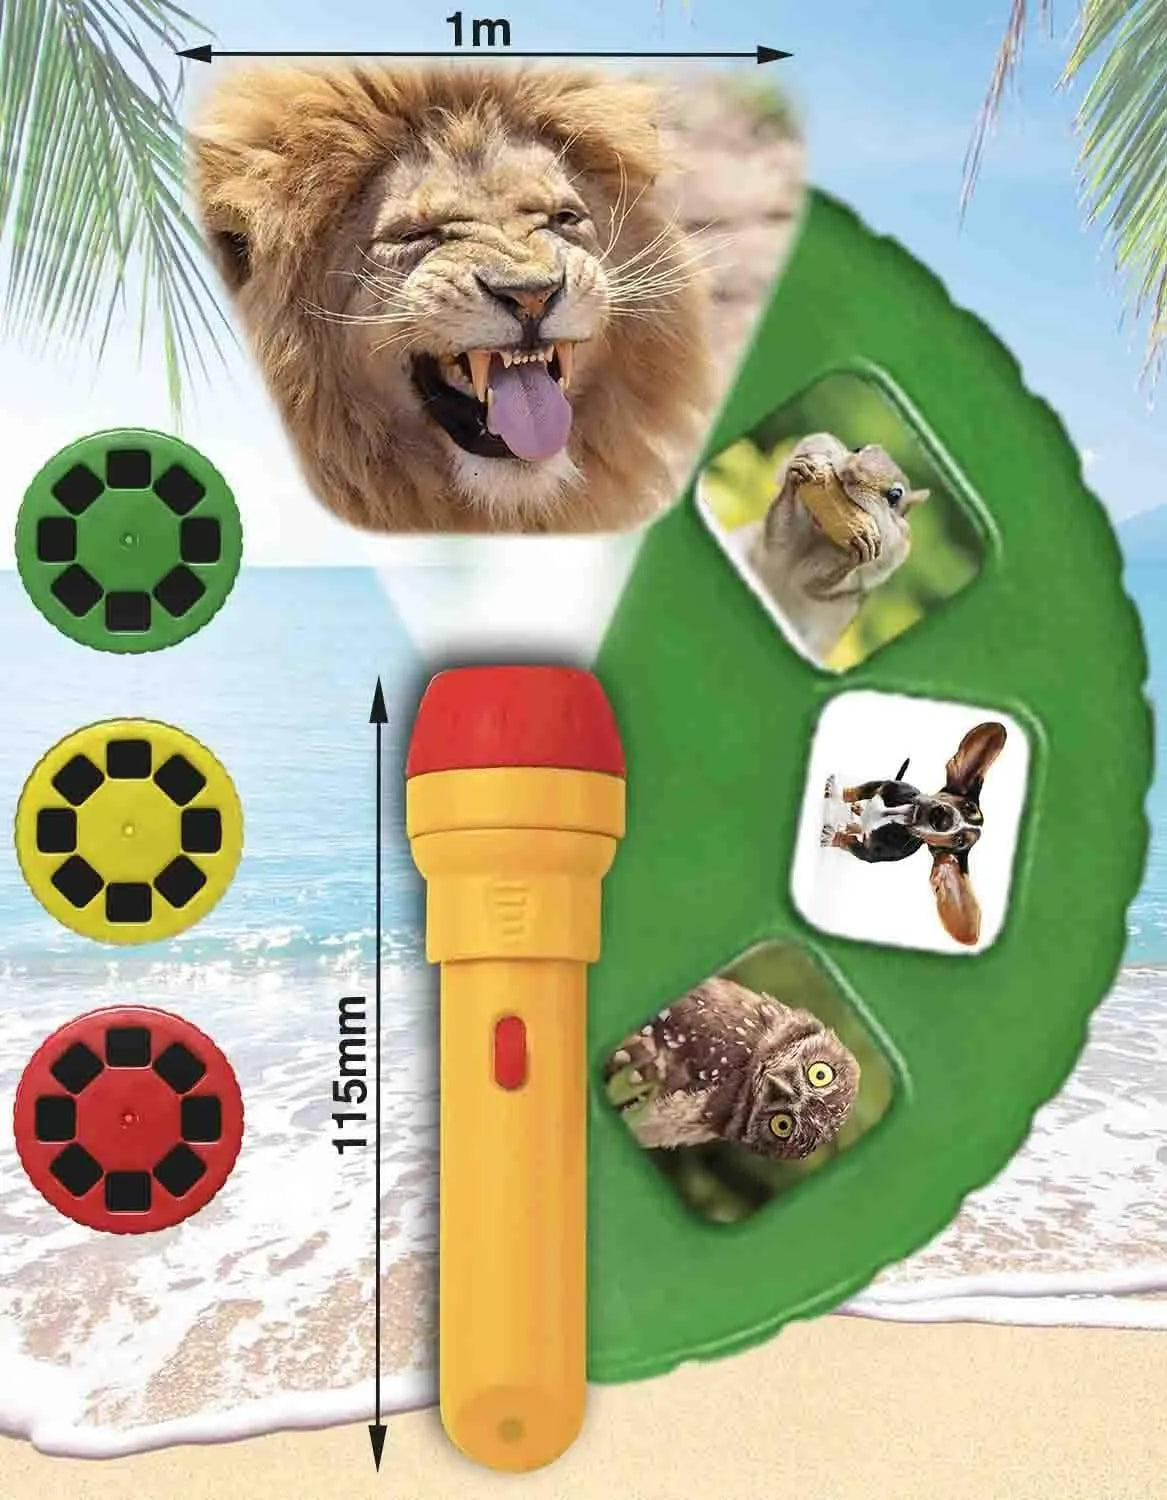 animal learning toys - shop projector torch toy at The Toy Room